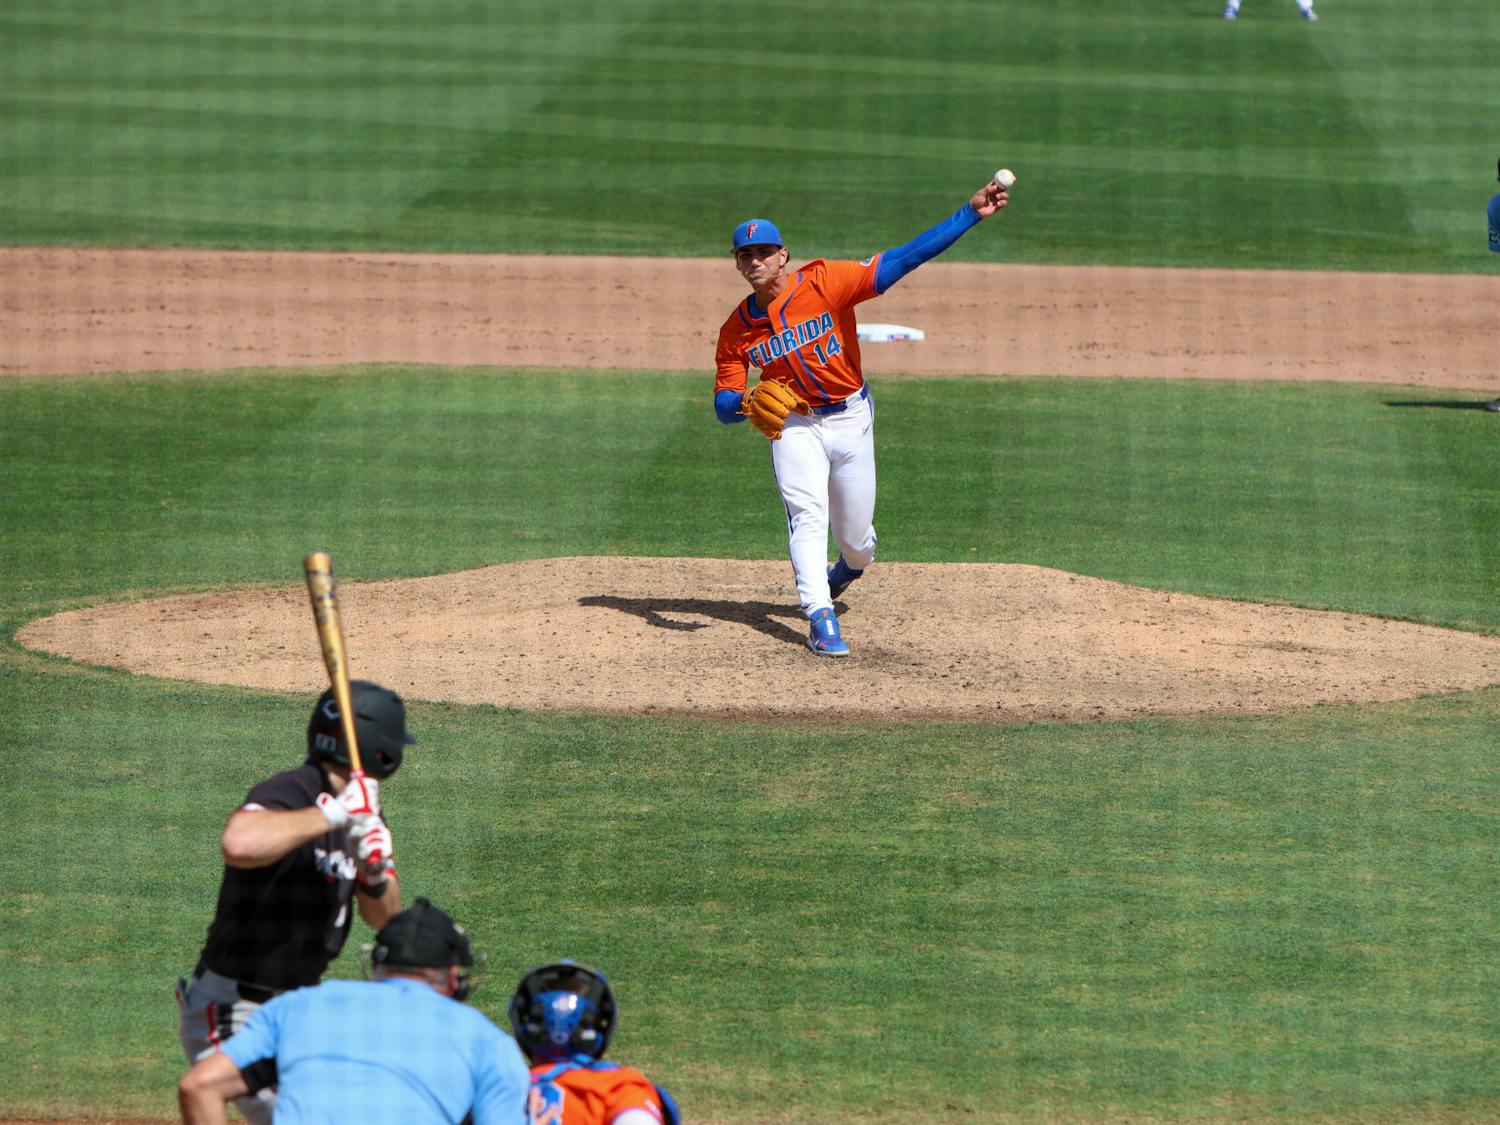 Florida pitcher Jac Caglianone delivers a pitch in the Gators' 13-7 victory against the Cincinnati Bearcats Sunday, Feb. 26, 2023.